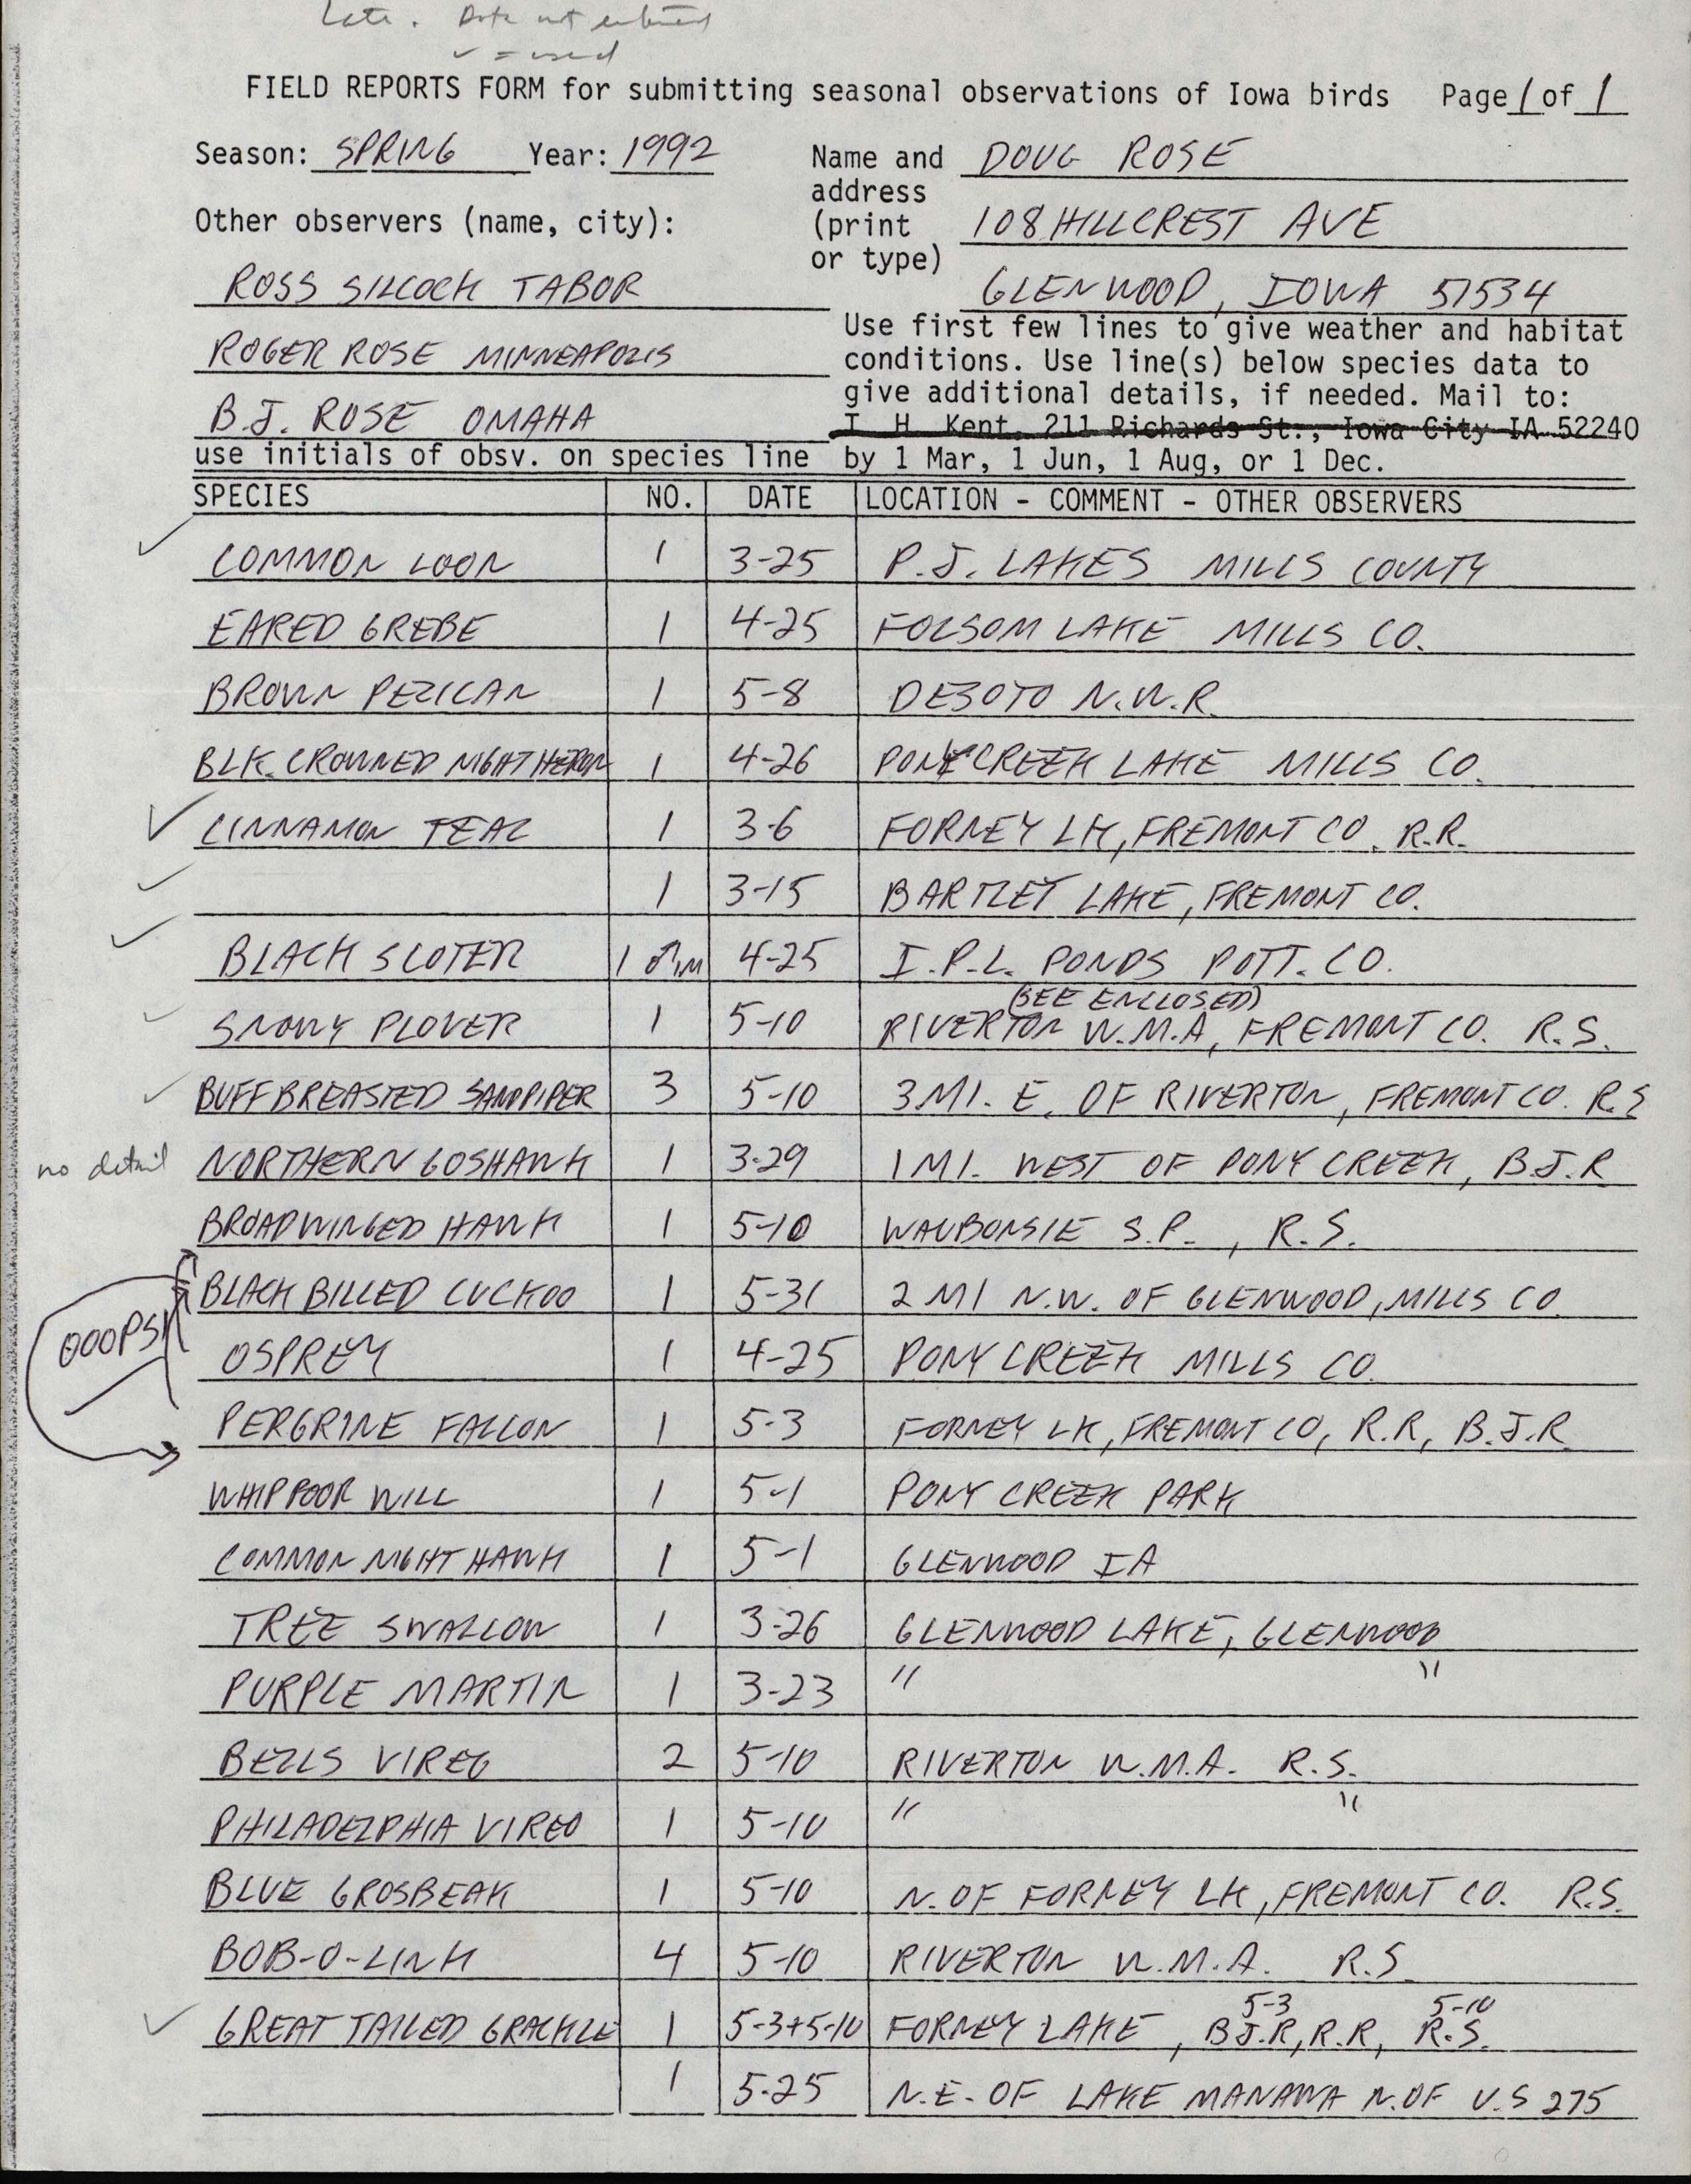 Field reports form for submitting seasonal observations of Iowa birds, Douglas Rose, spring 1992